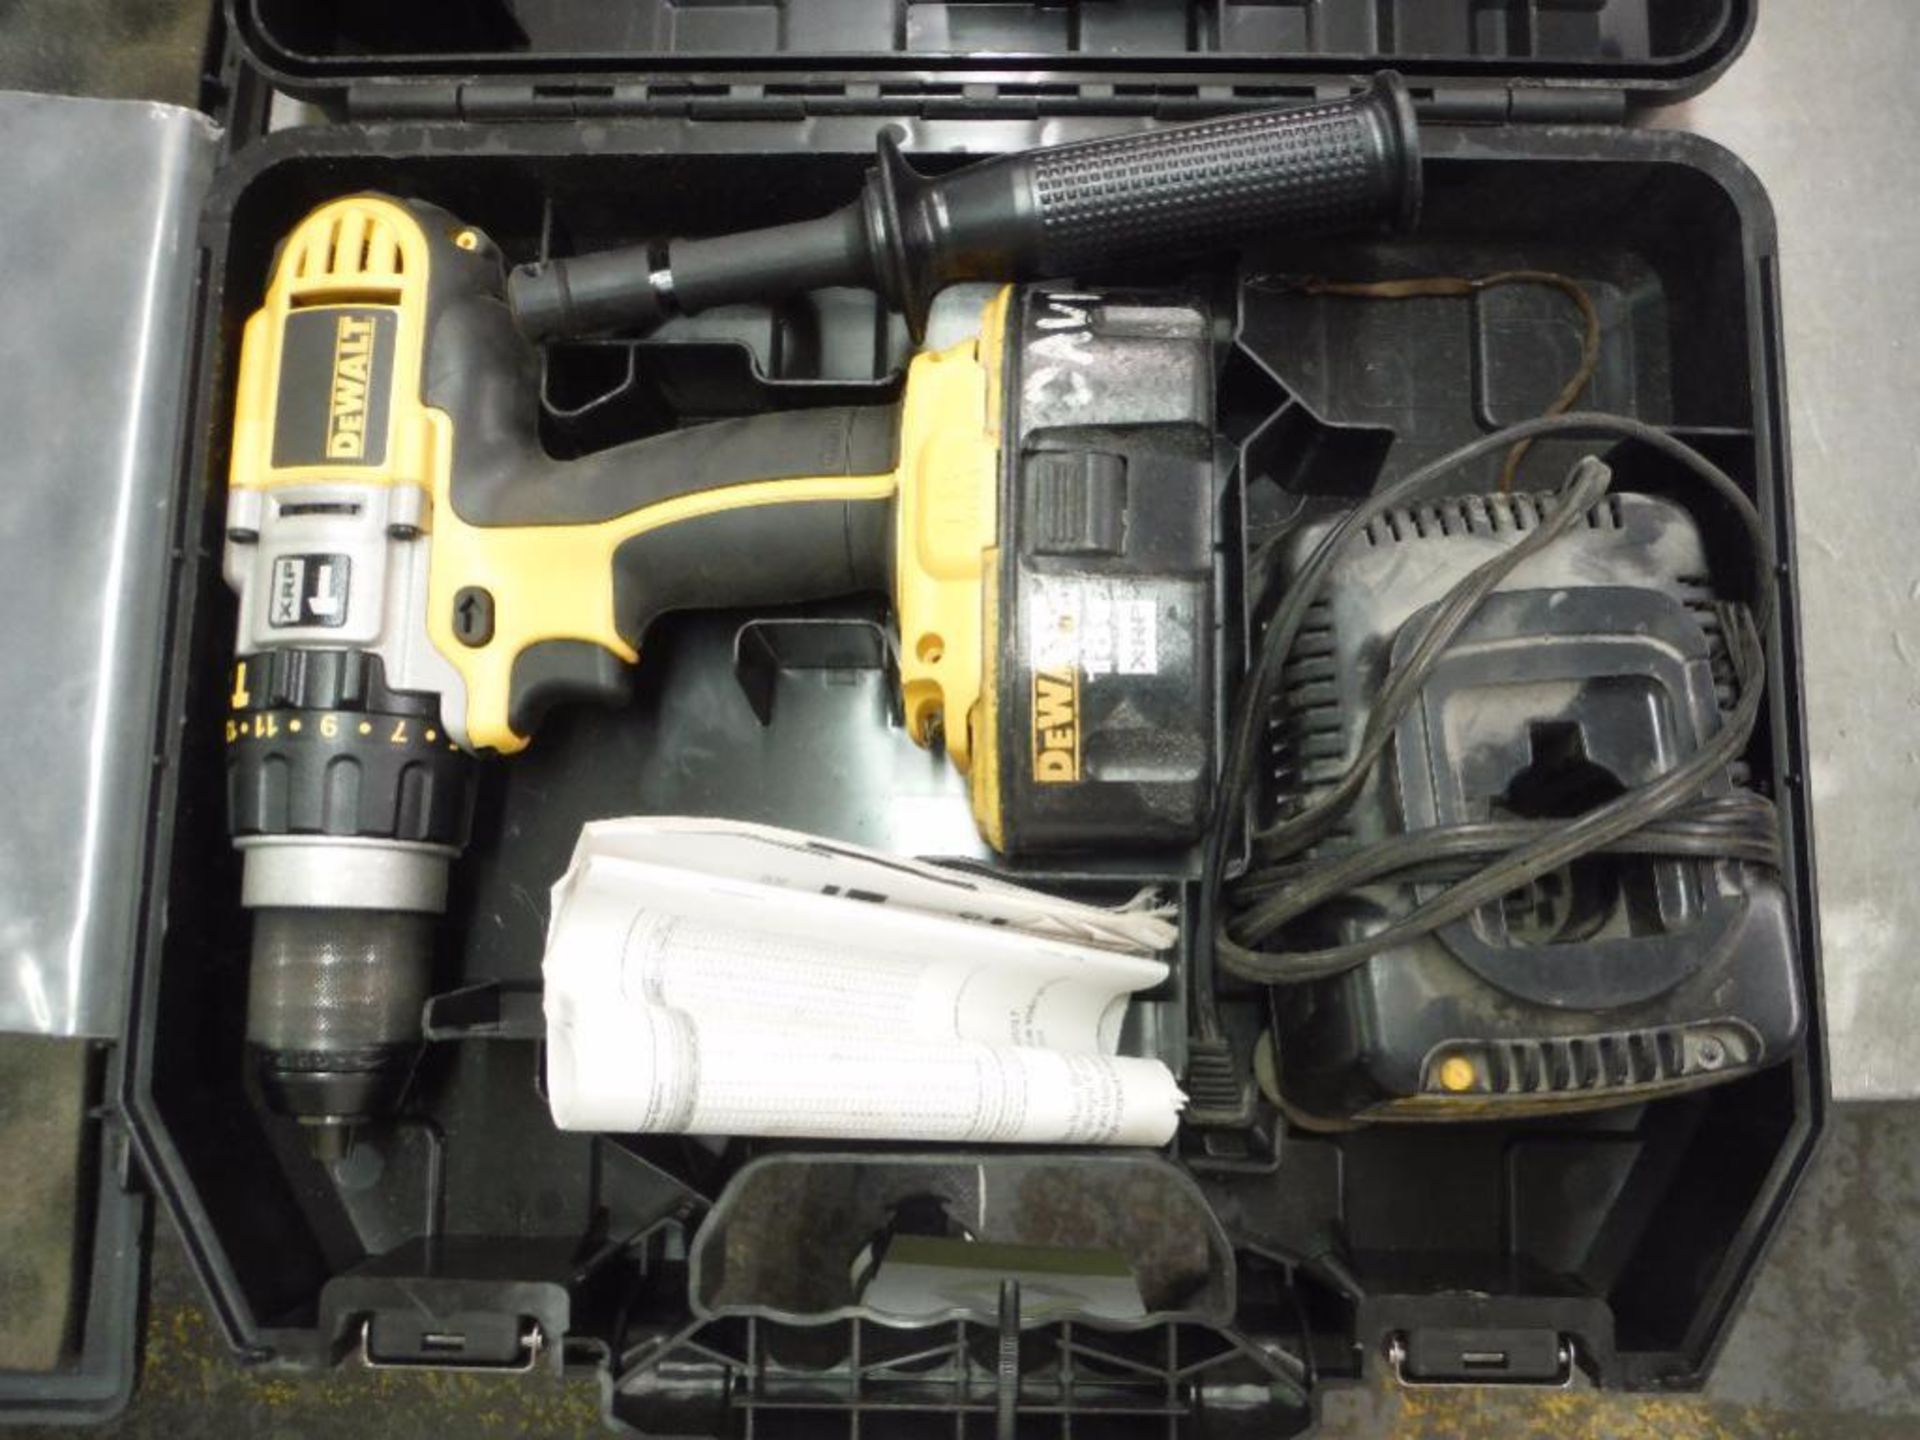 Dewalt 18 volt xrp cordless drill, battery, battery charger, case ** Rigging Fee: $5 ** - Image 2 of 3